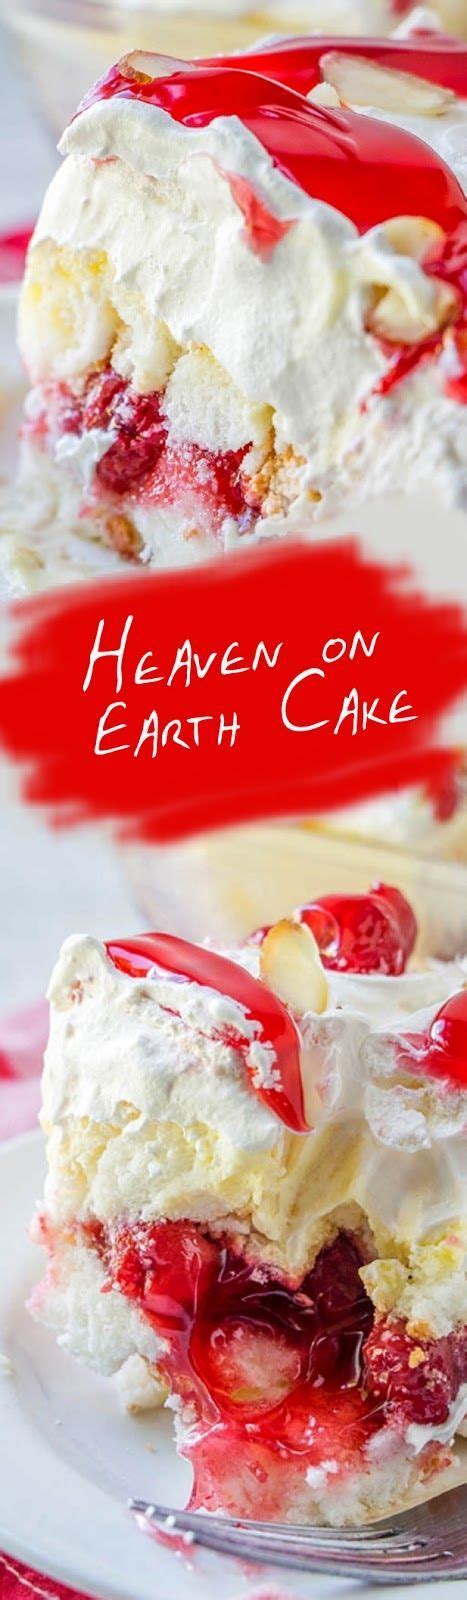 Heaven on earth cake with delicious layers of angel cake, sour cream pudding, cherry pie filling, whipped topping, and almonds. Perfect Heaven on Earth Cake | Cake recipes, Earth cake ...